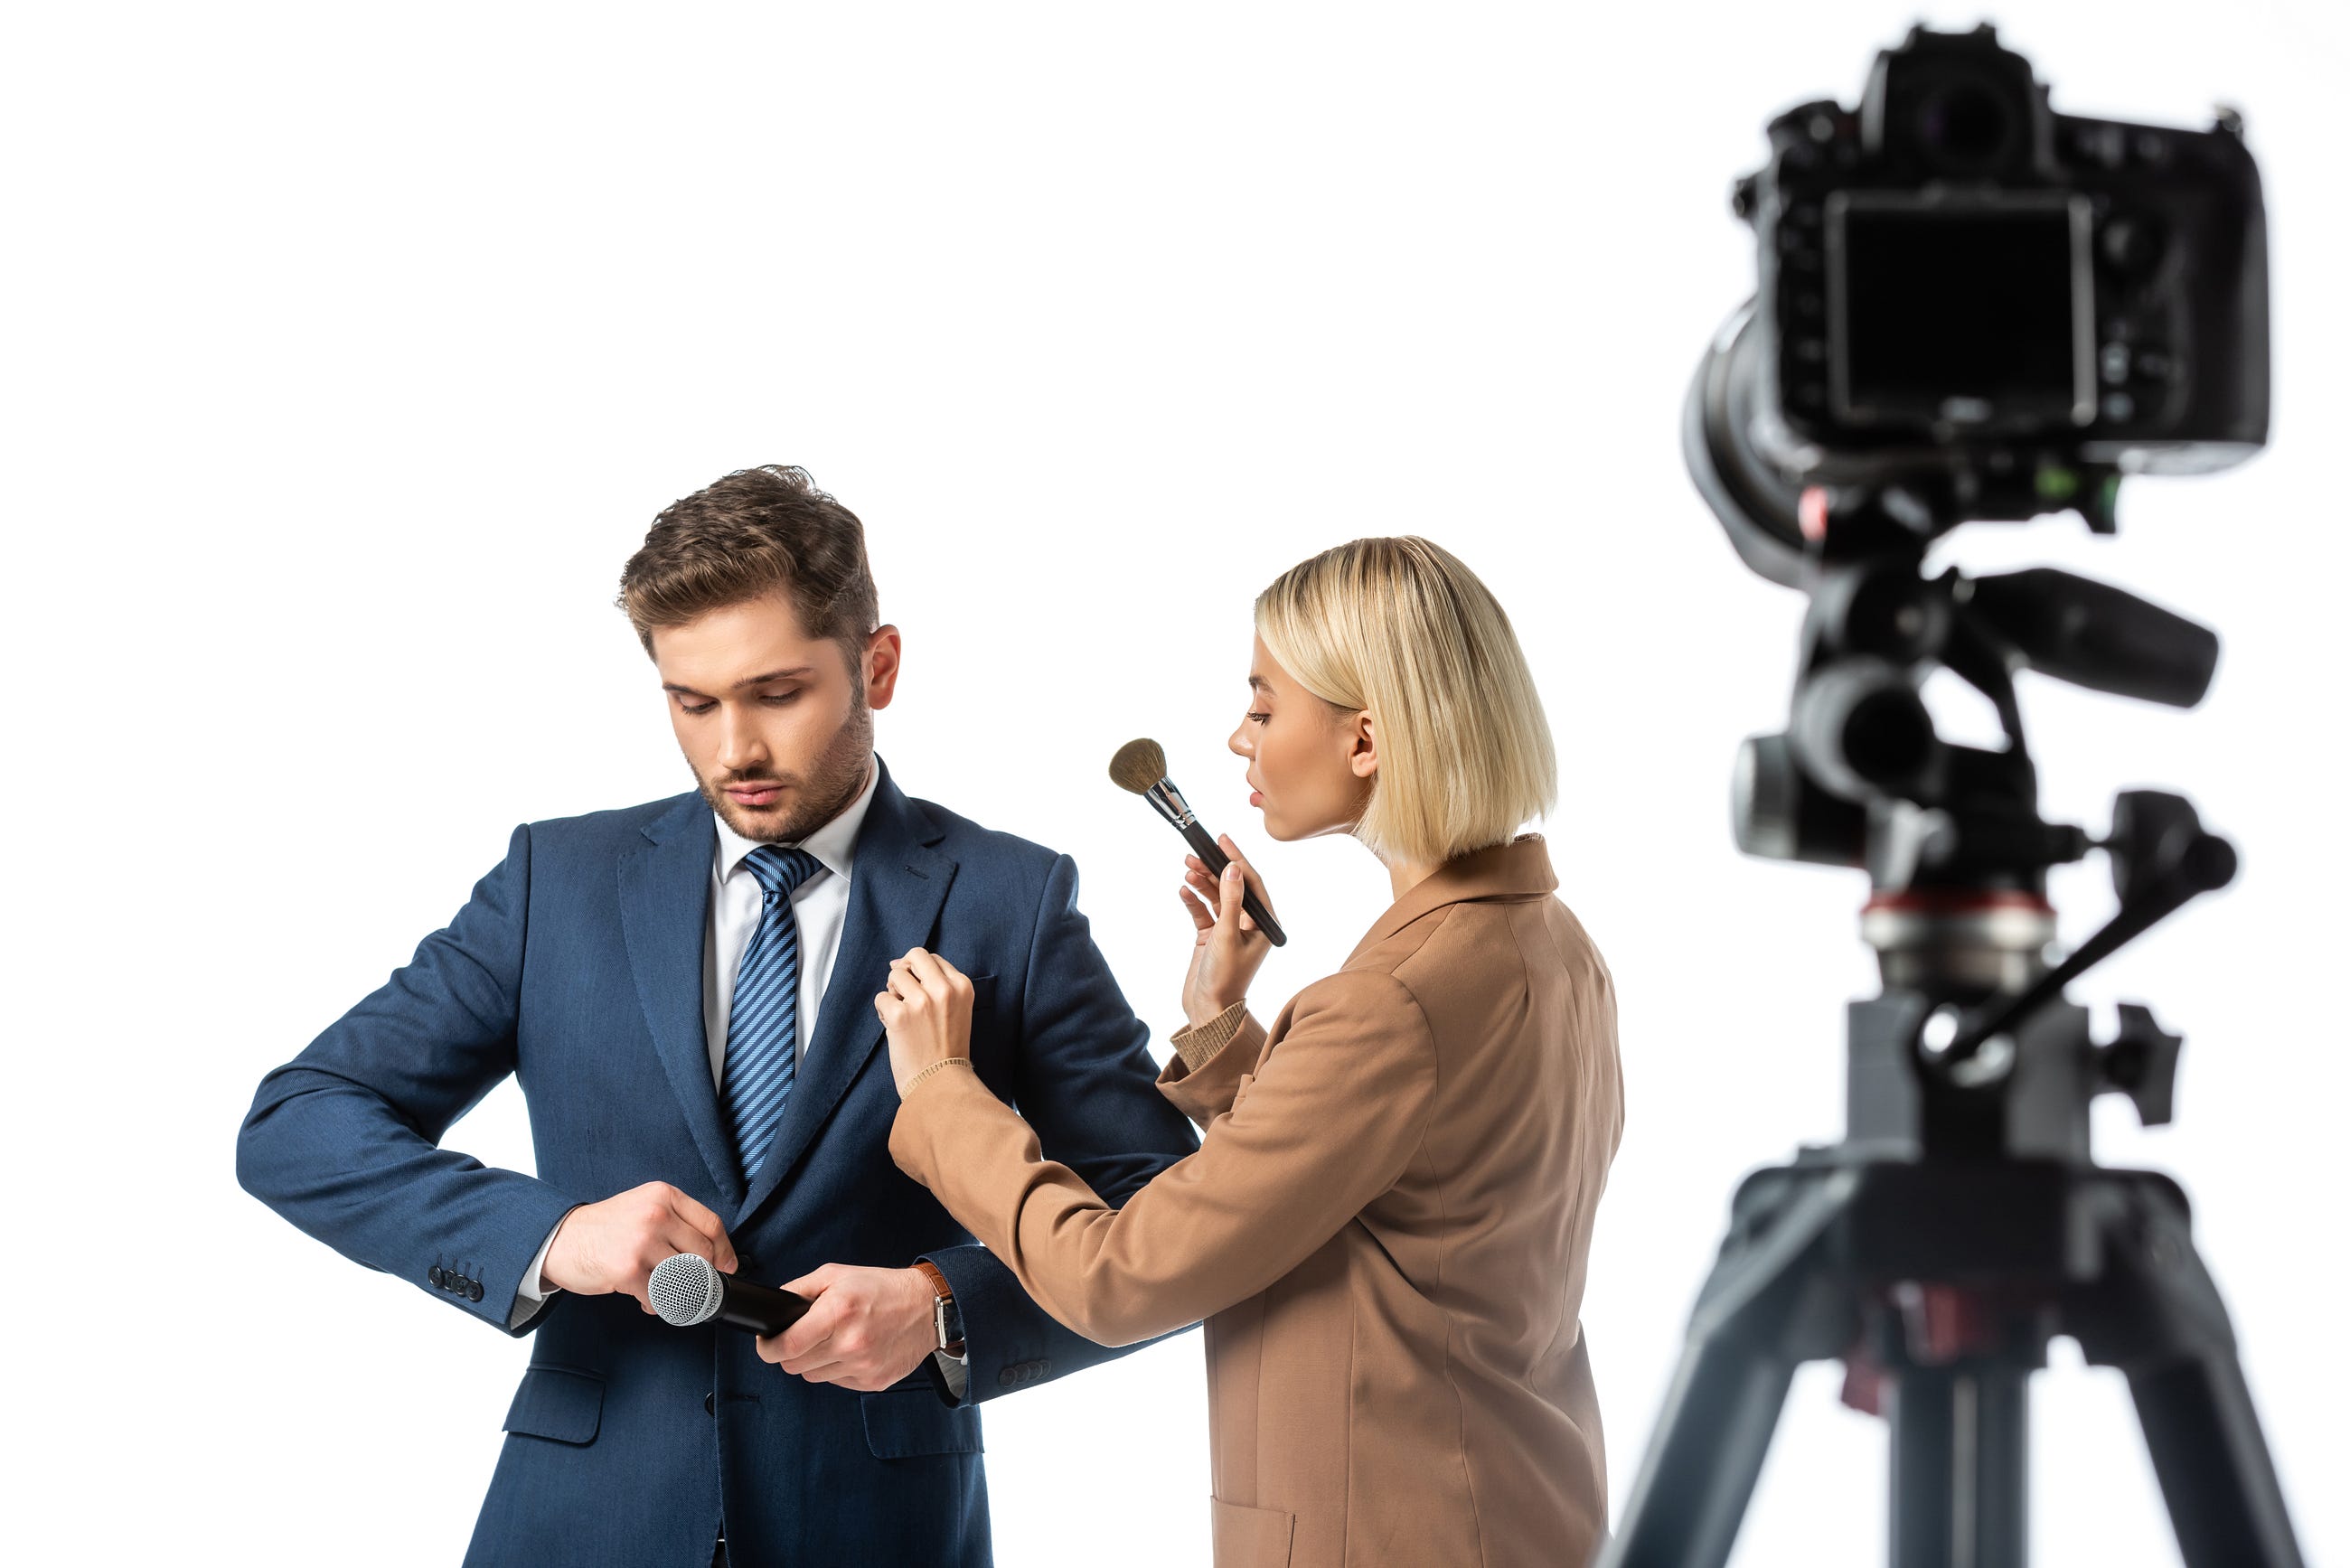 Master Your Media Appearance with the WISE Approach